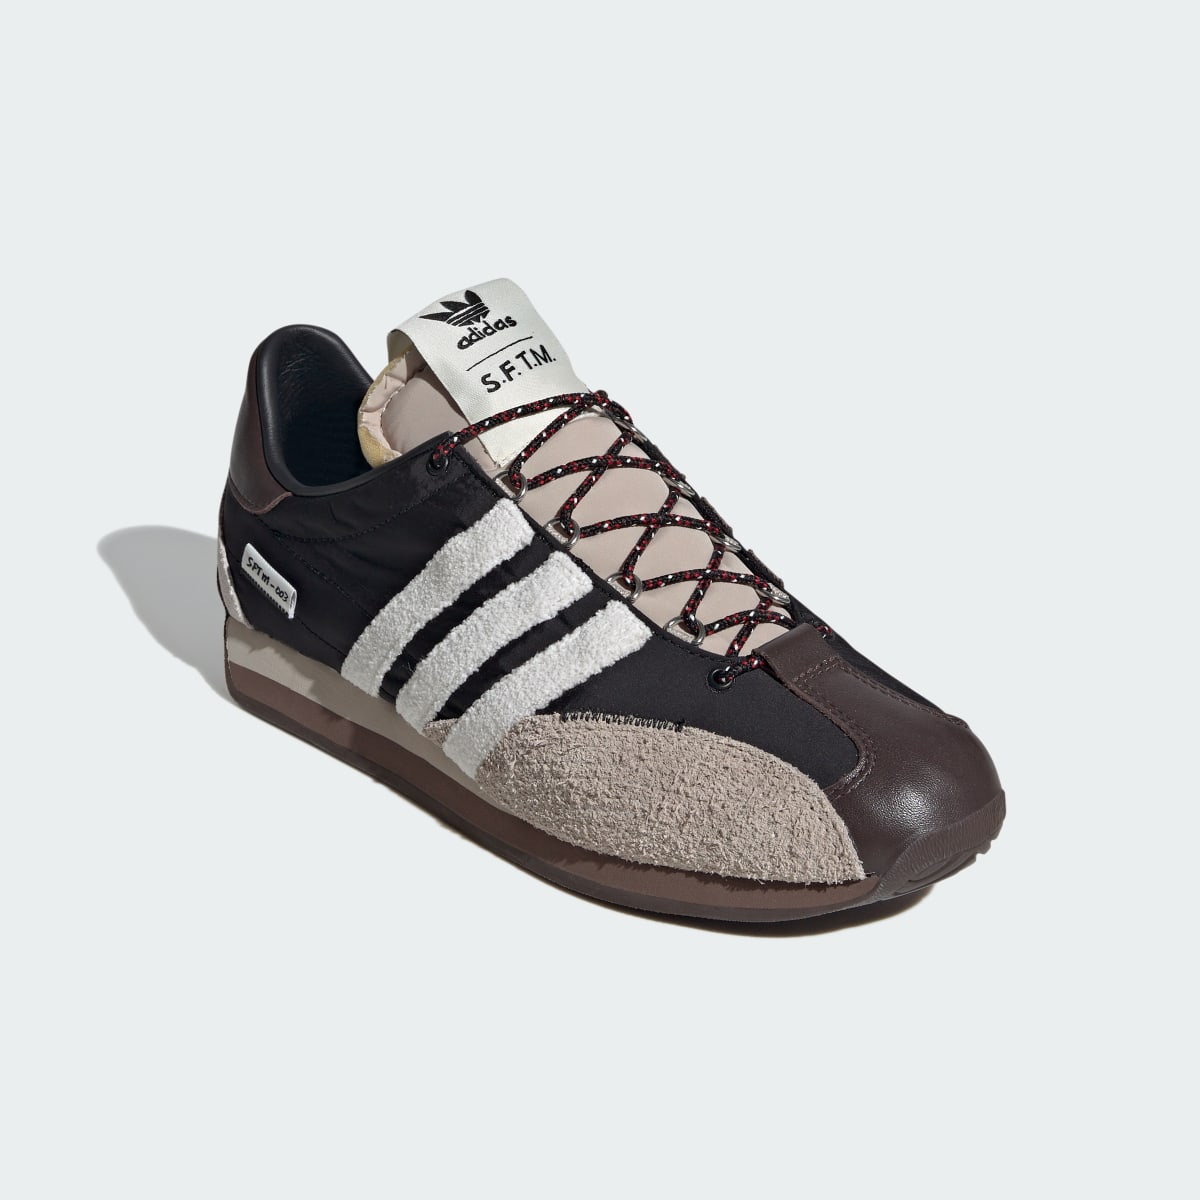 Adidas Chaussure Country OG Low. 6